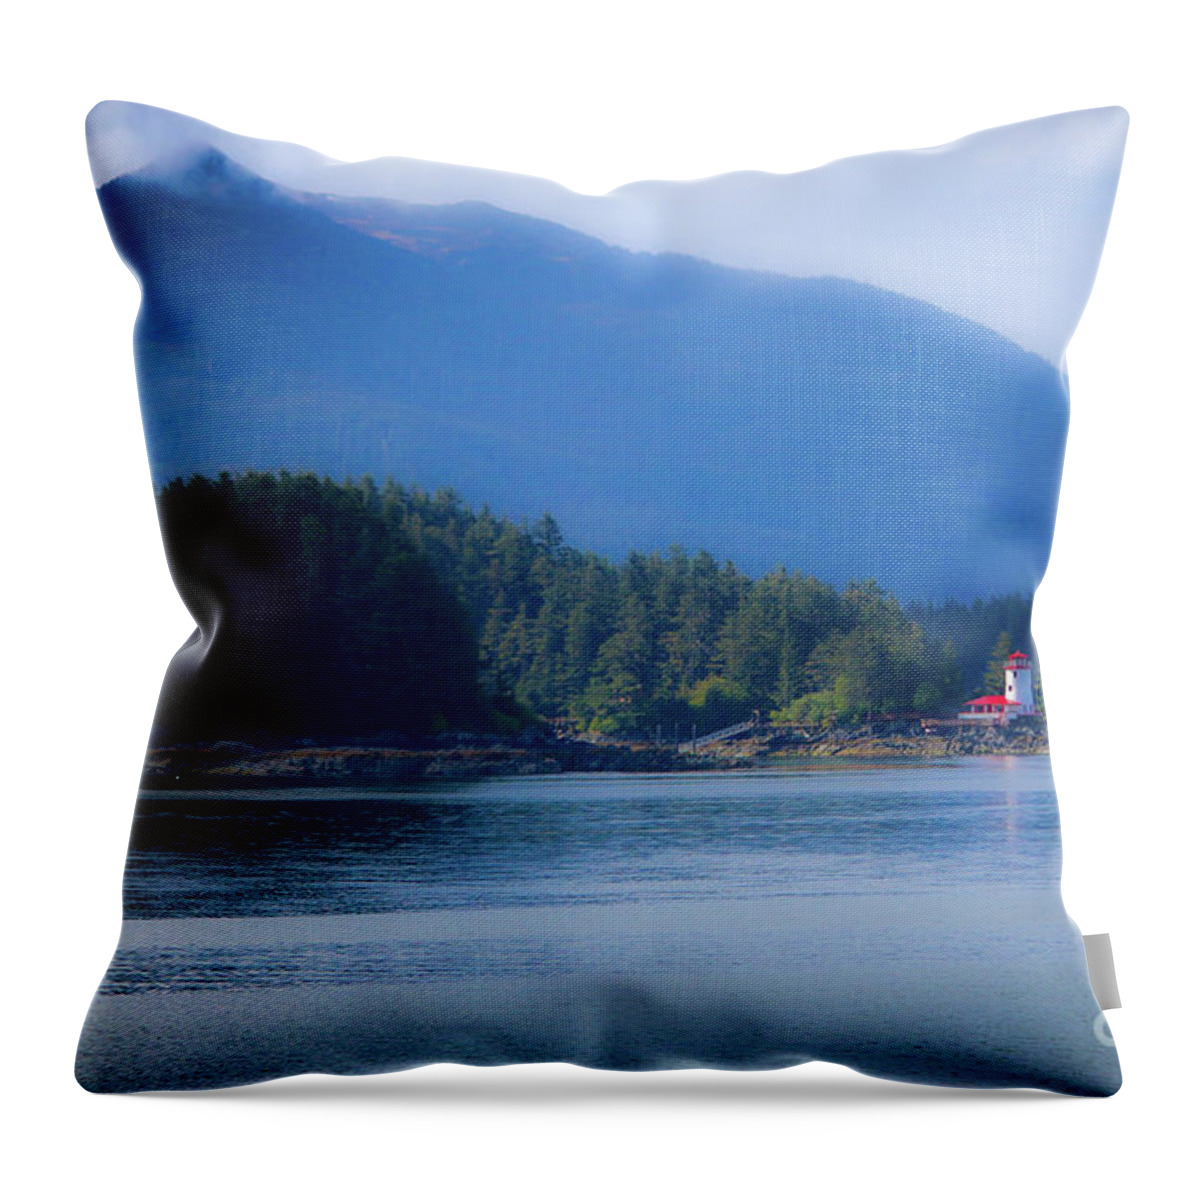 Lighthouse Throw Pillow featuring the photograph Lighthouse Sitka Alaska by Veronica Batterson